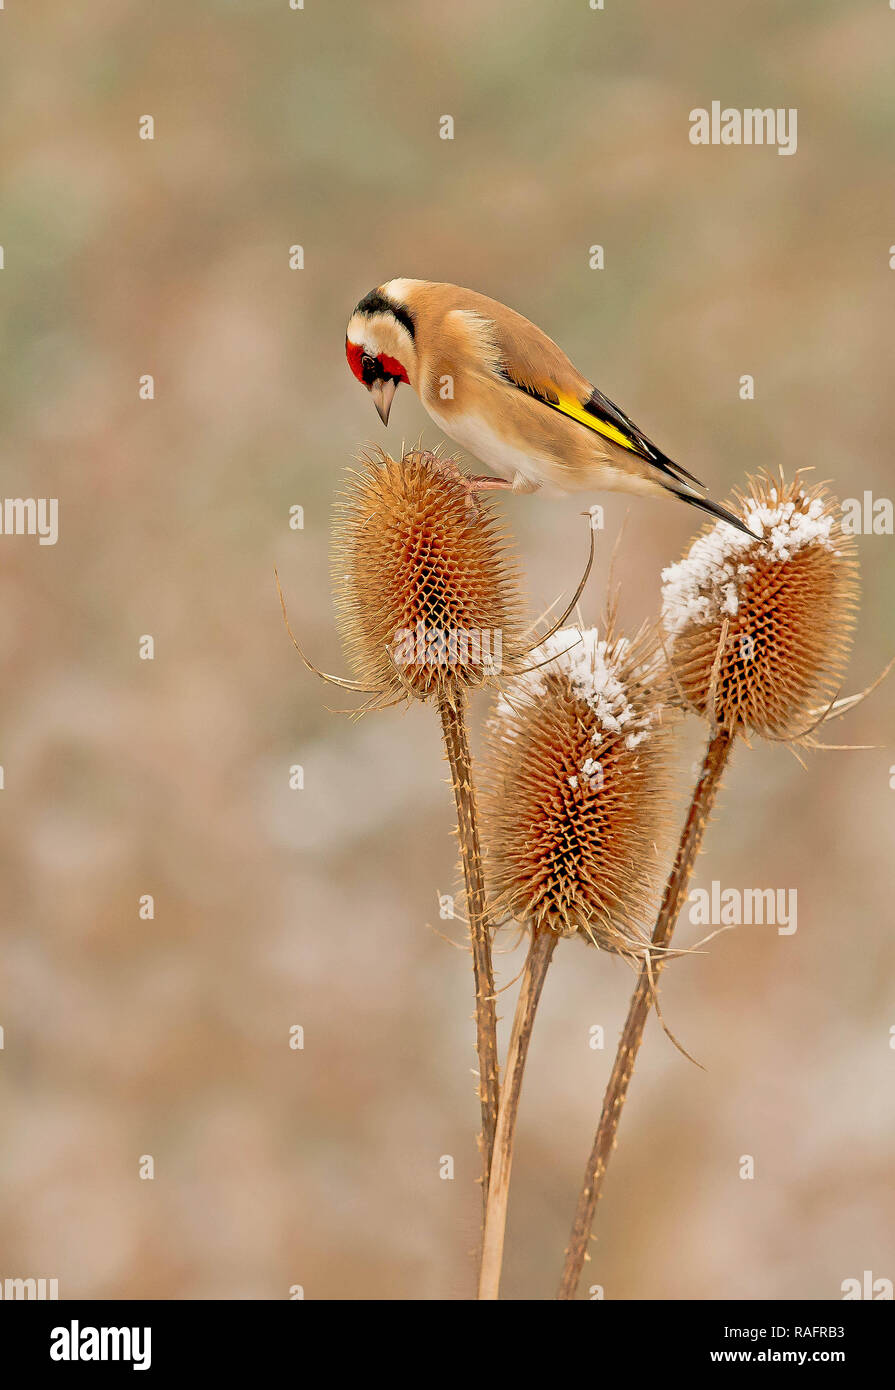 AN ACROBATIC Goldfinch bird has been captured performing the splits as it tries to balance between two teasel plants. The amusing pictures show the Go Stock Photo